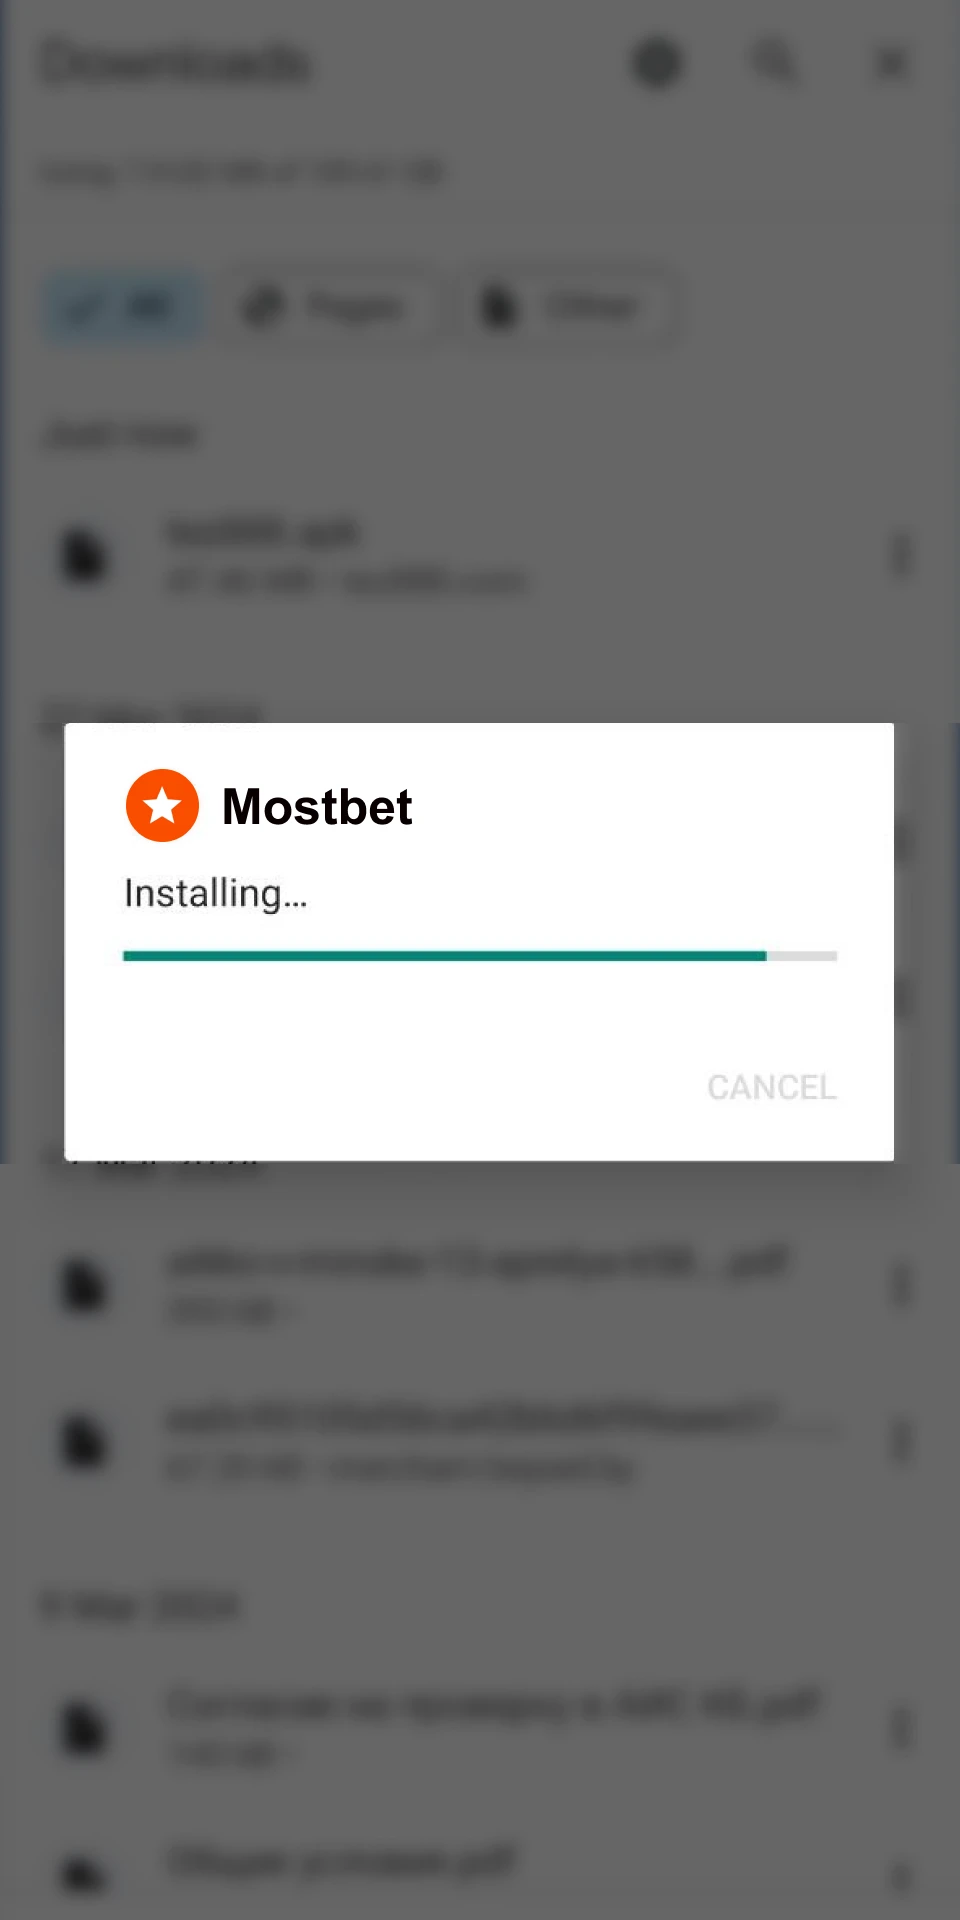 Install the Mostbet app on your Android device and start placing bets.